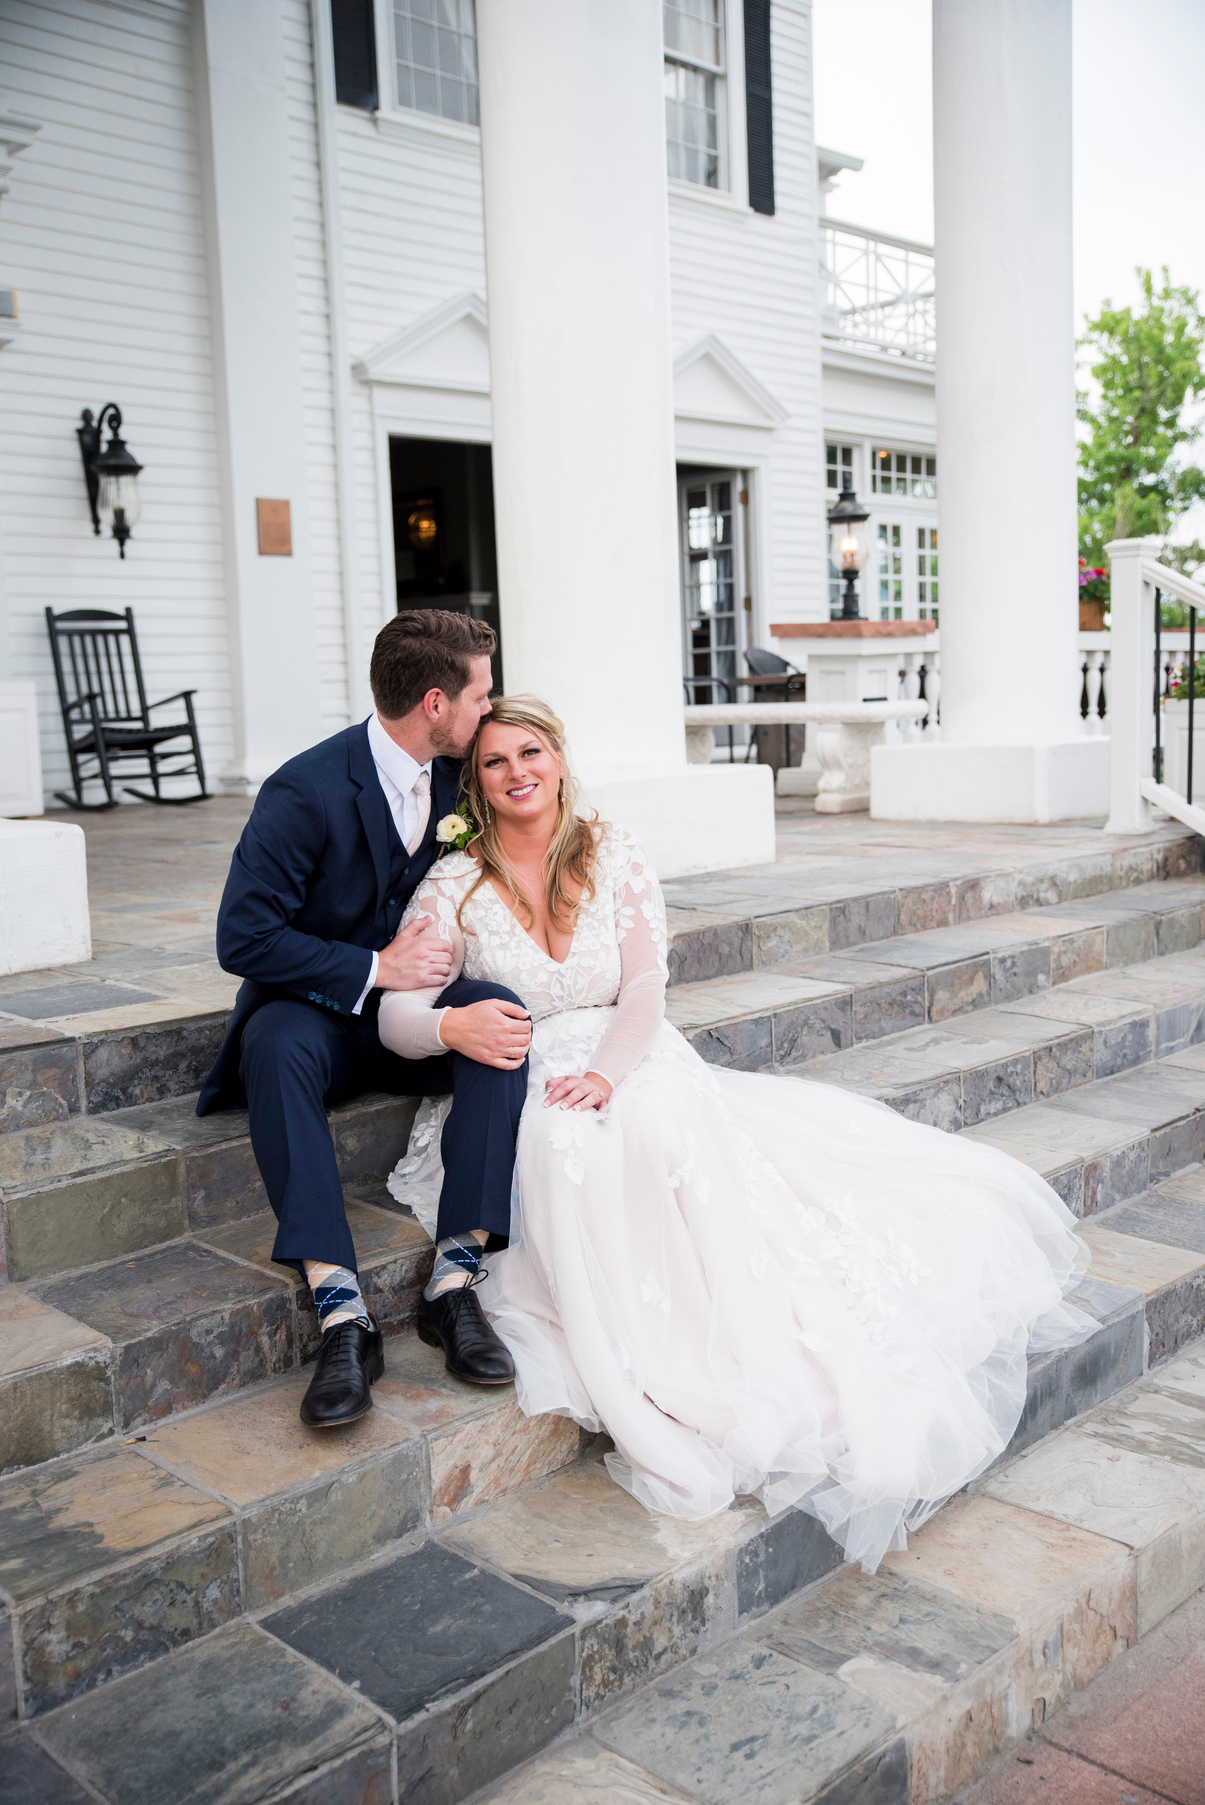 A bride and groom sitting on steps in front of white house at The Manor House in Littleton, Colorado.